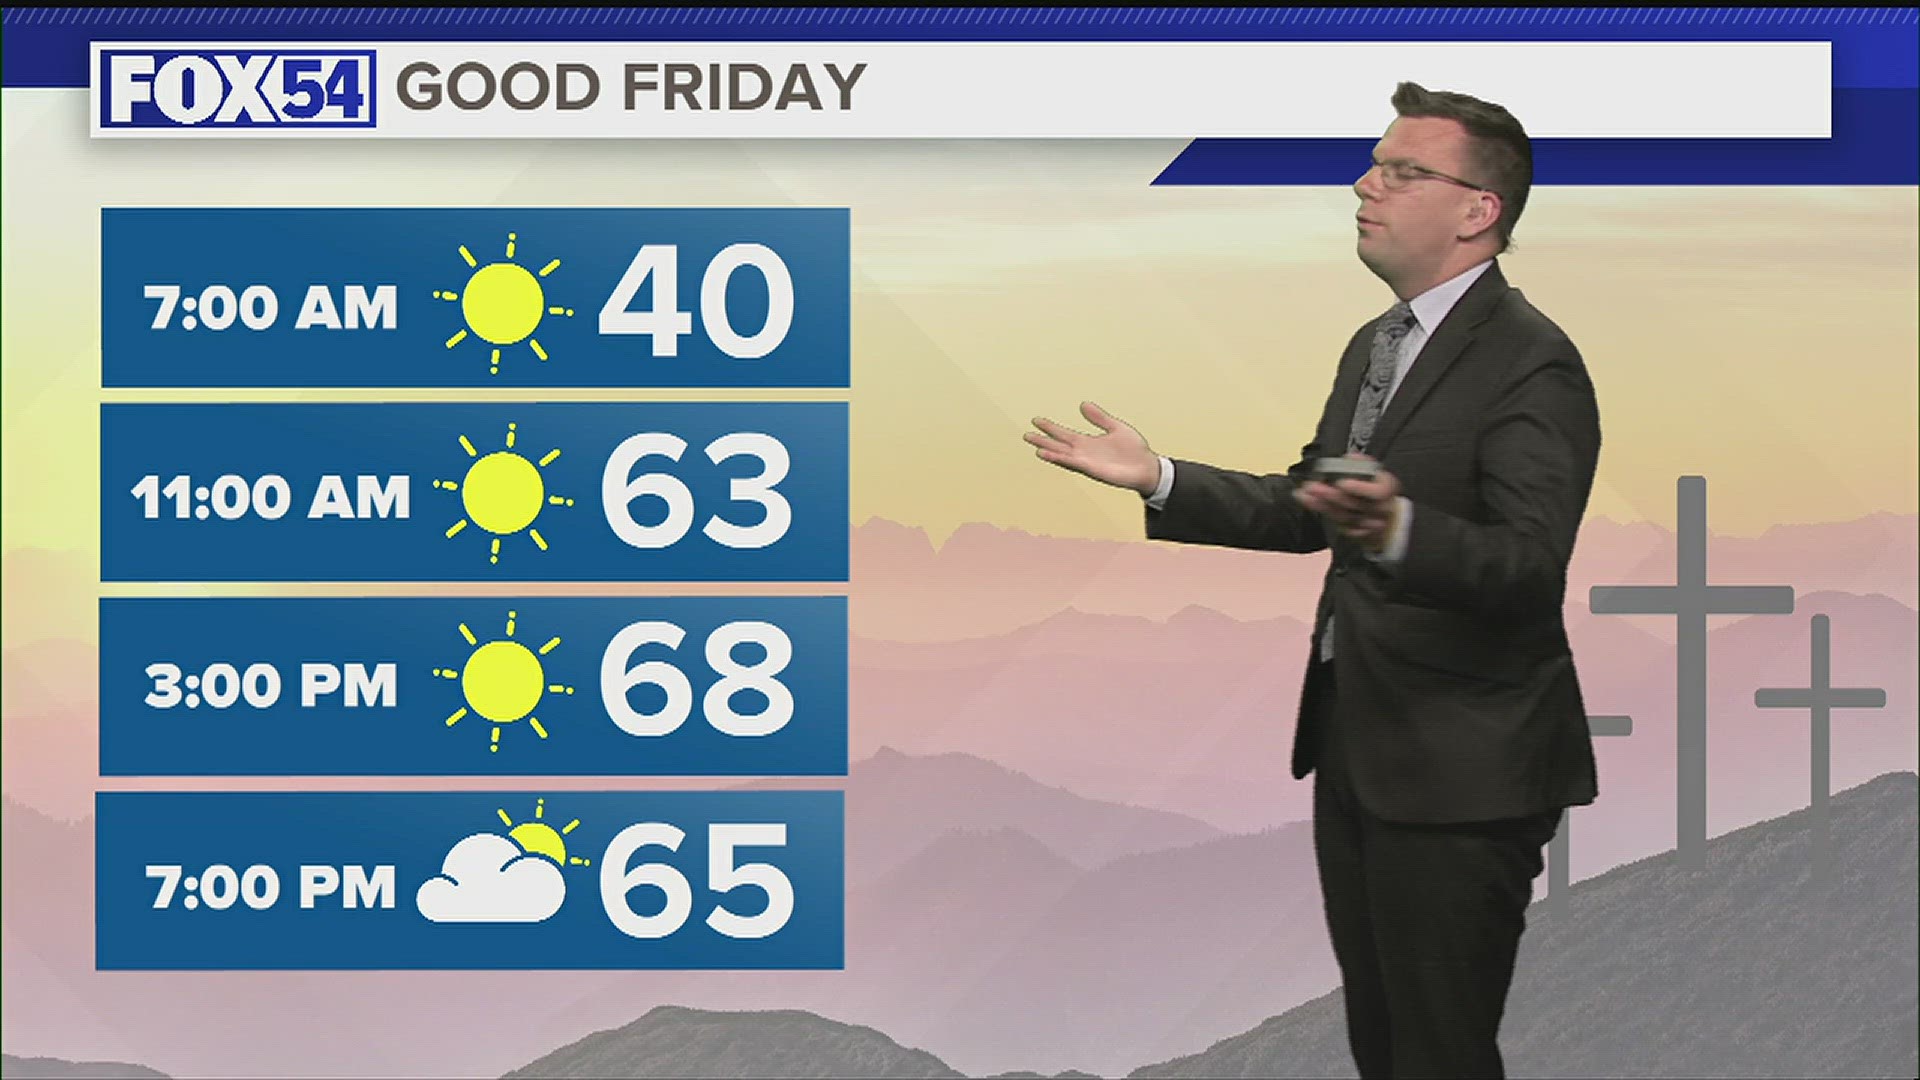 We're going to see much warmer air across the Tennessee Valley for Good Friday and then the Easter Weekend.